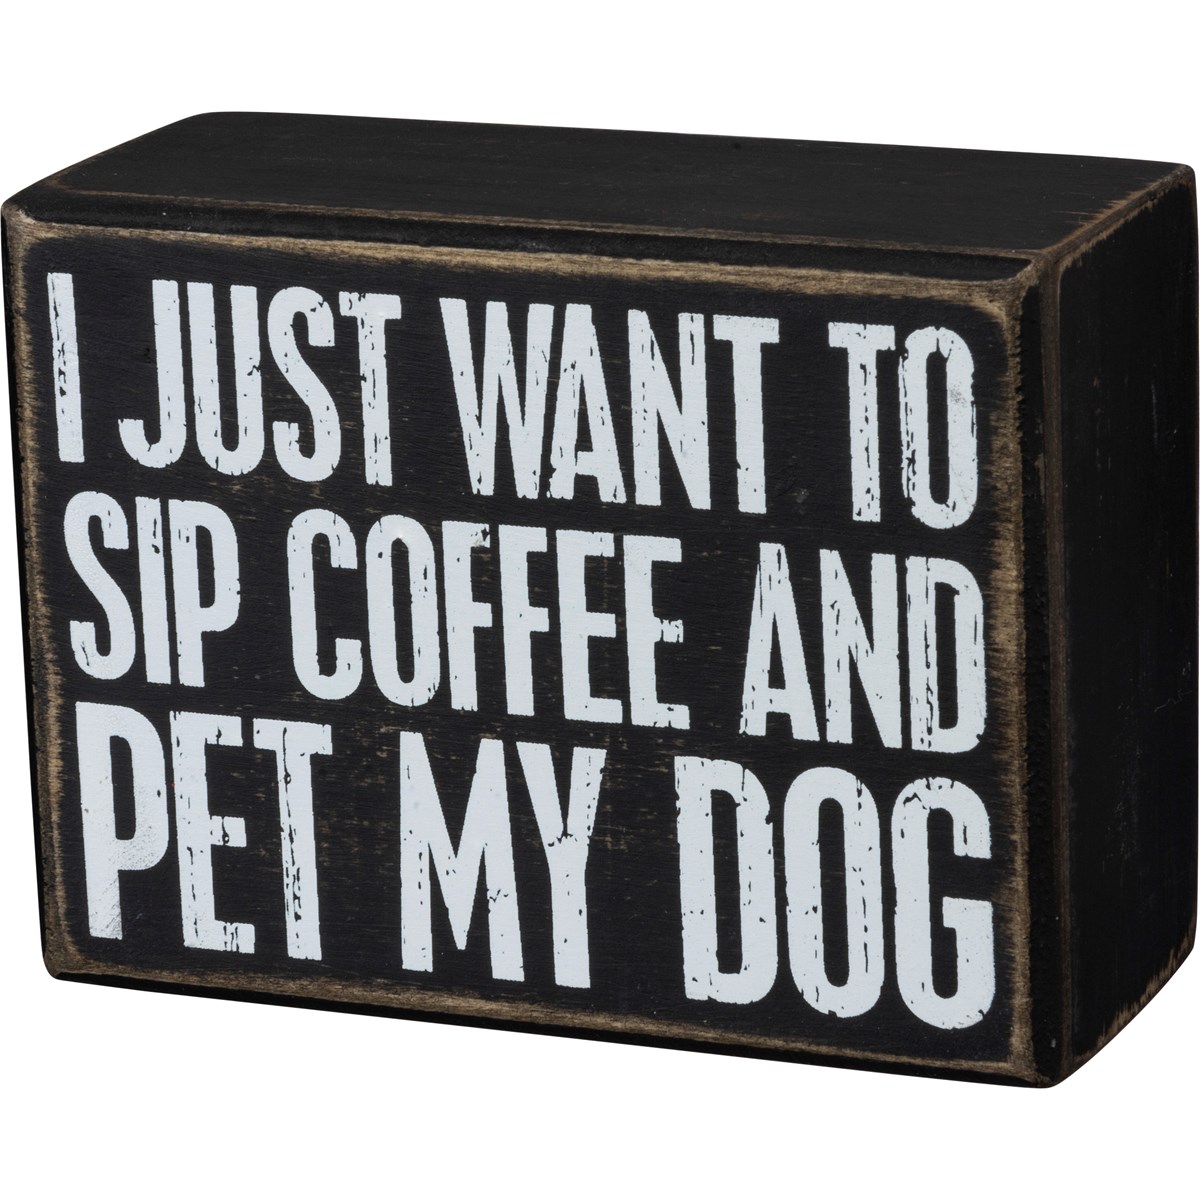 Just Want To Sip Coffee And Pet My Dog Box Sign - Wood